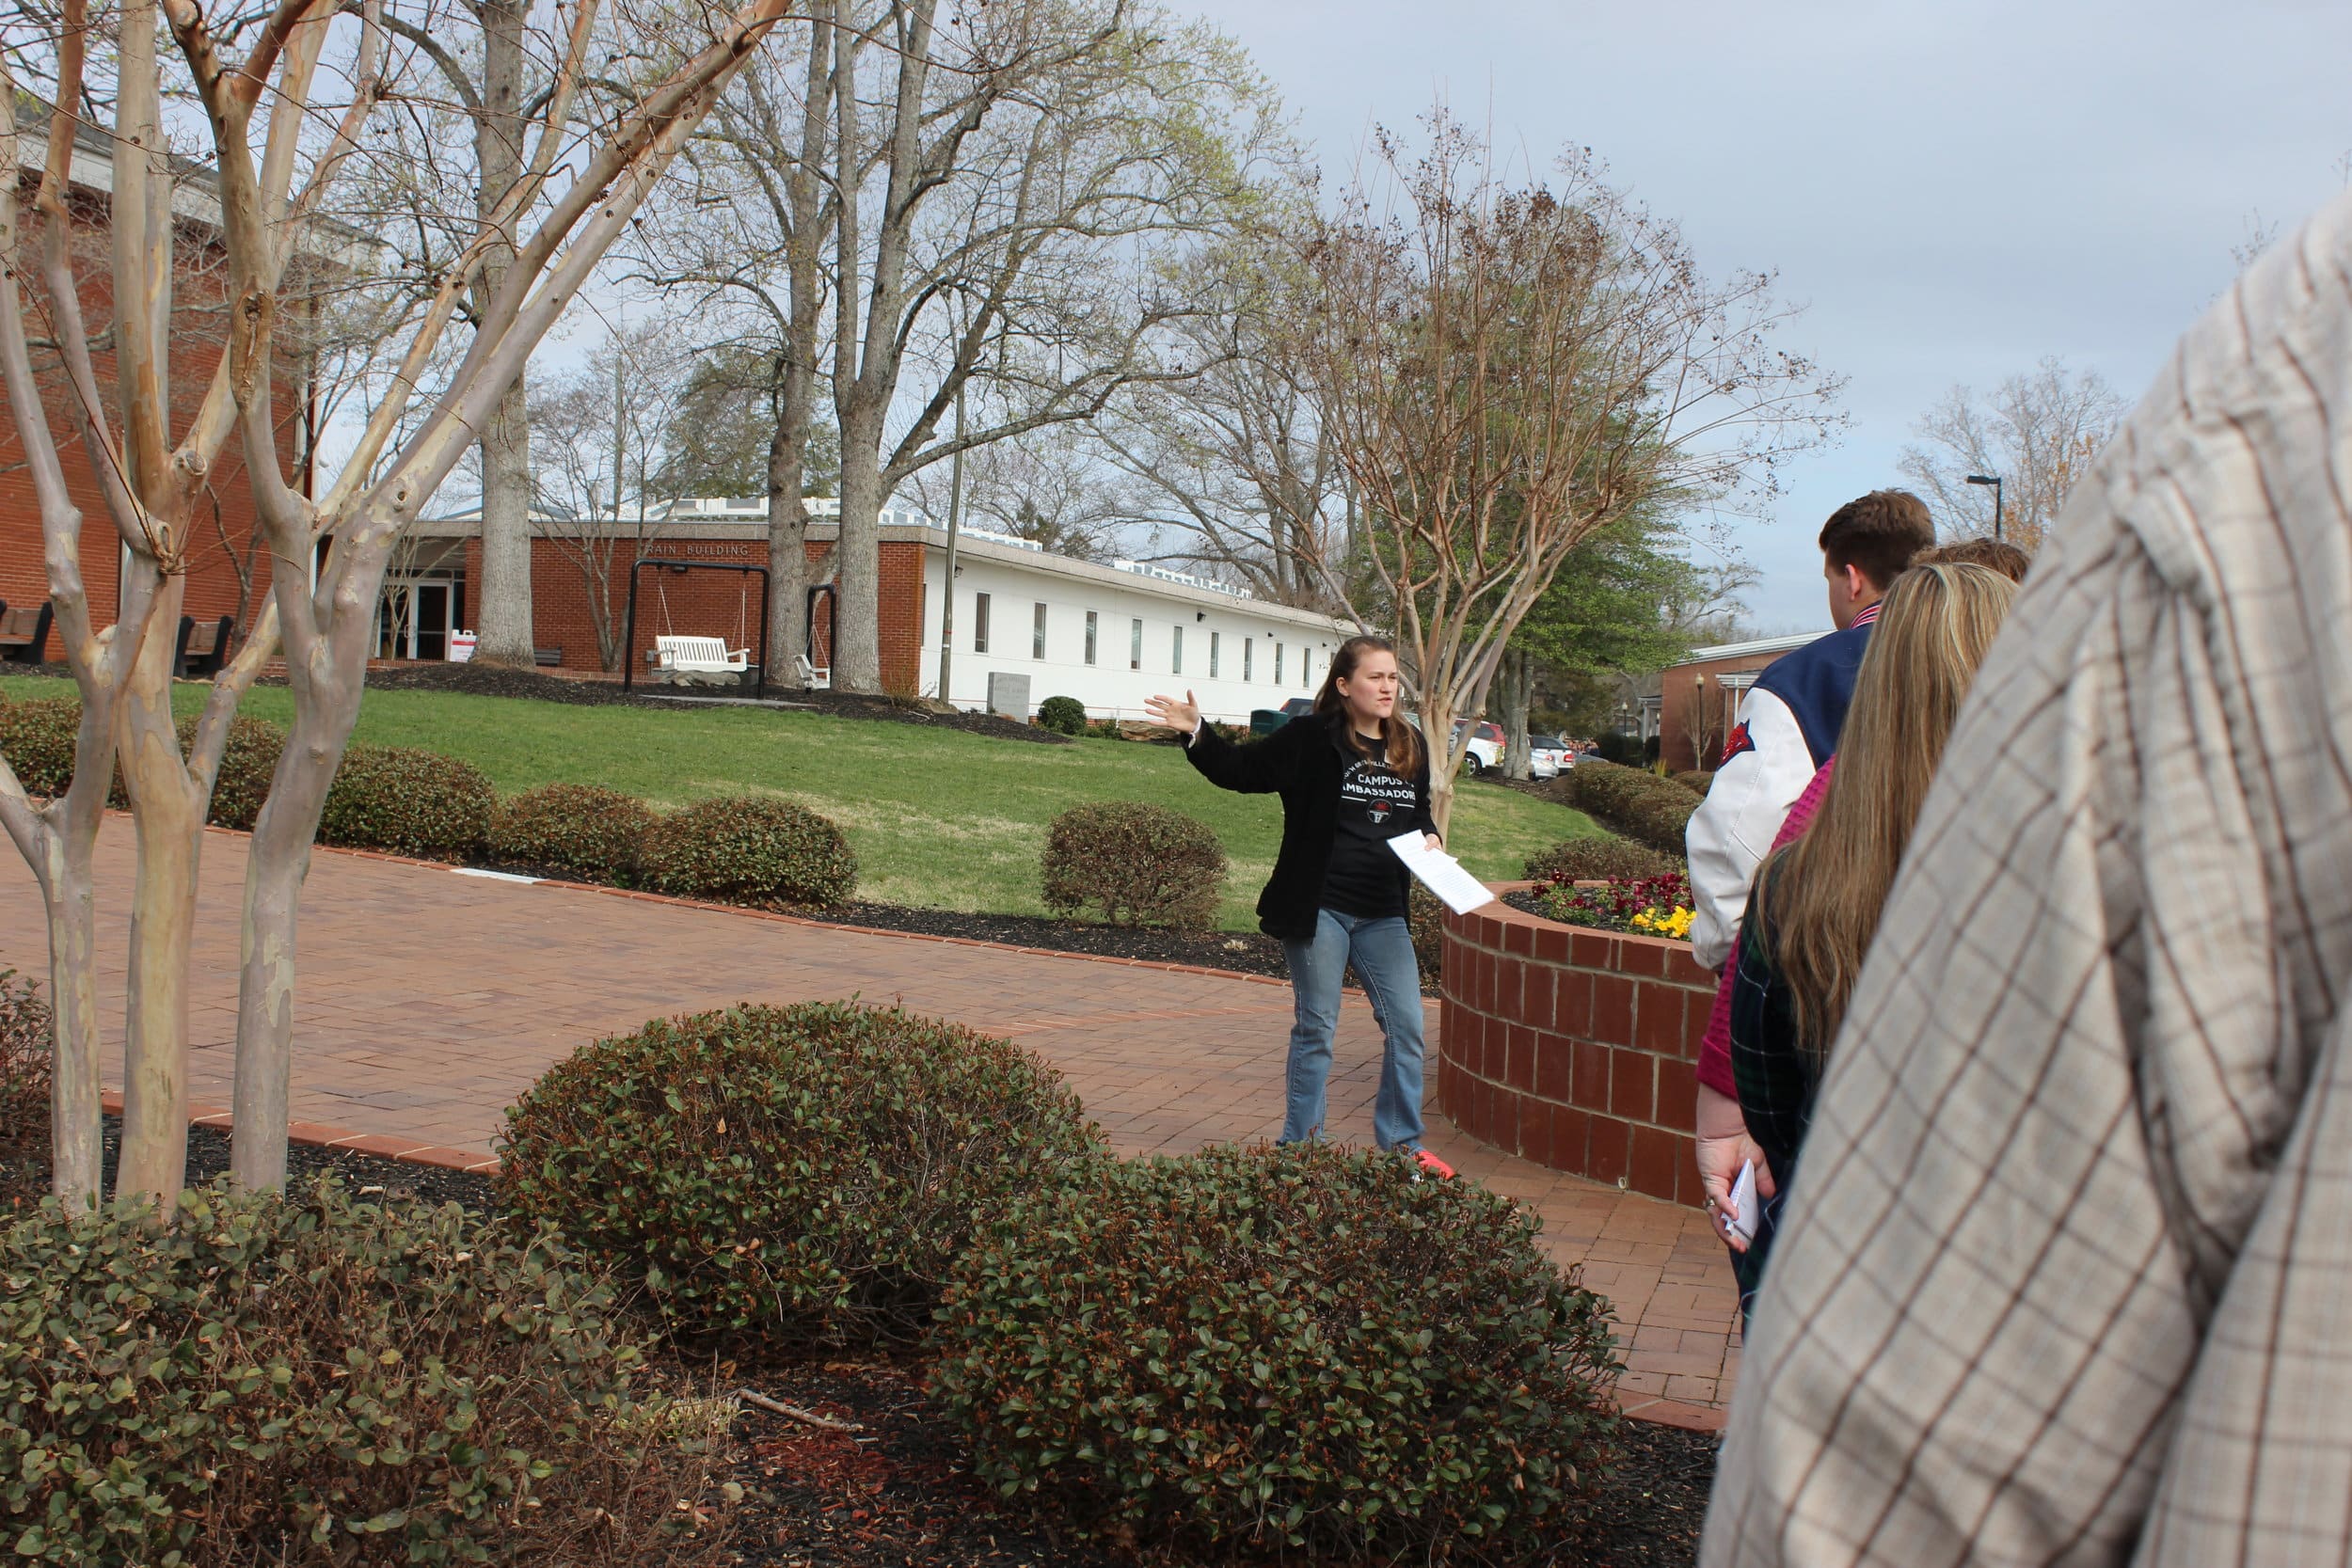 Abigail Johnson led a fantastic tour, ensuring that her group had fun while they learned about NGU.